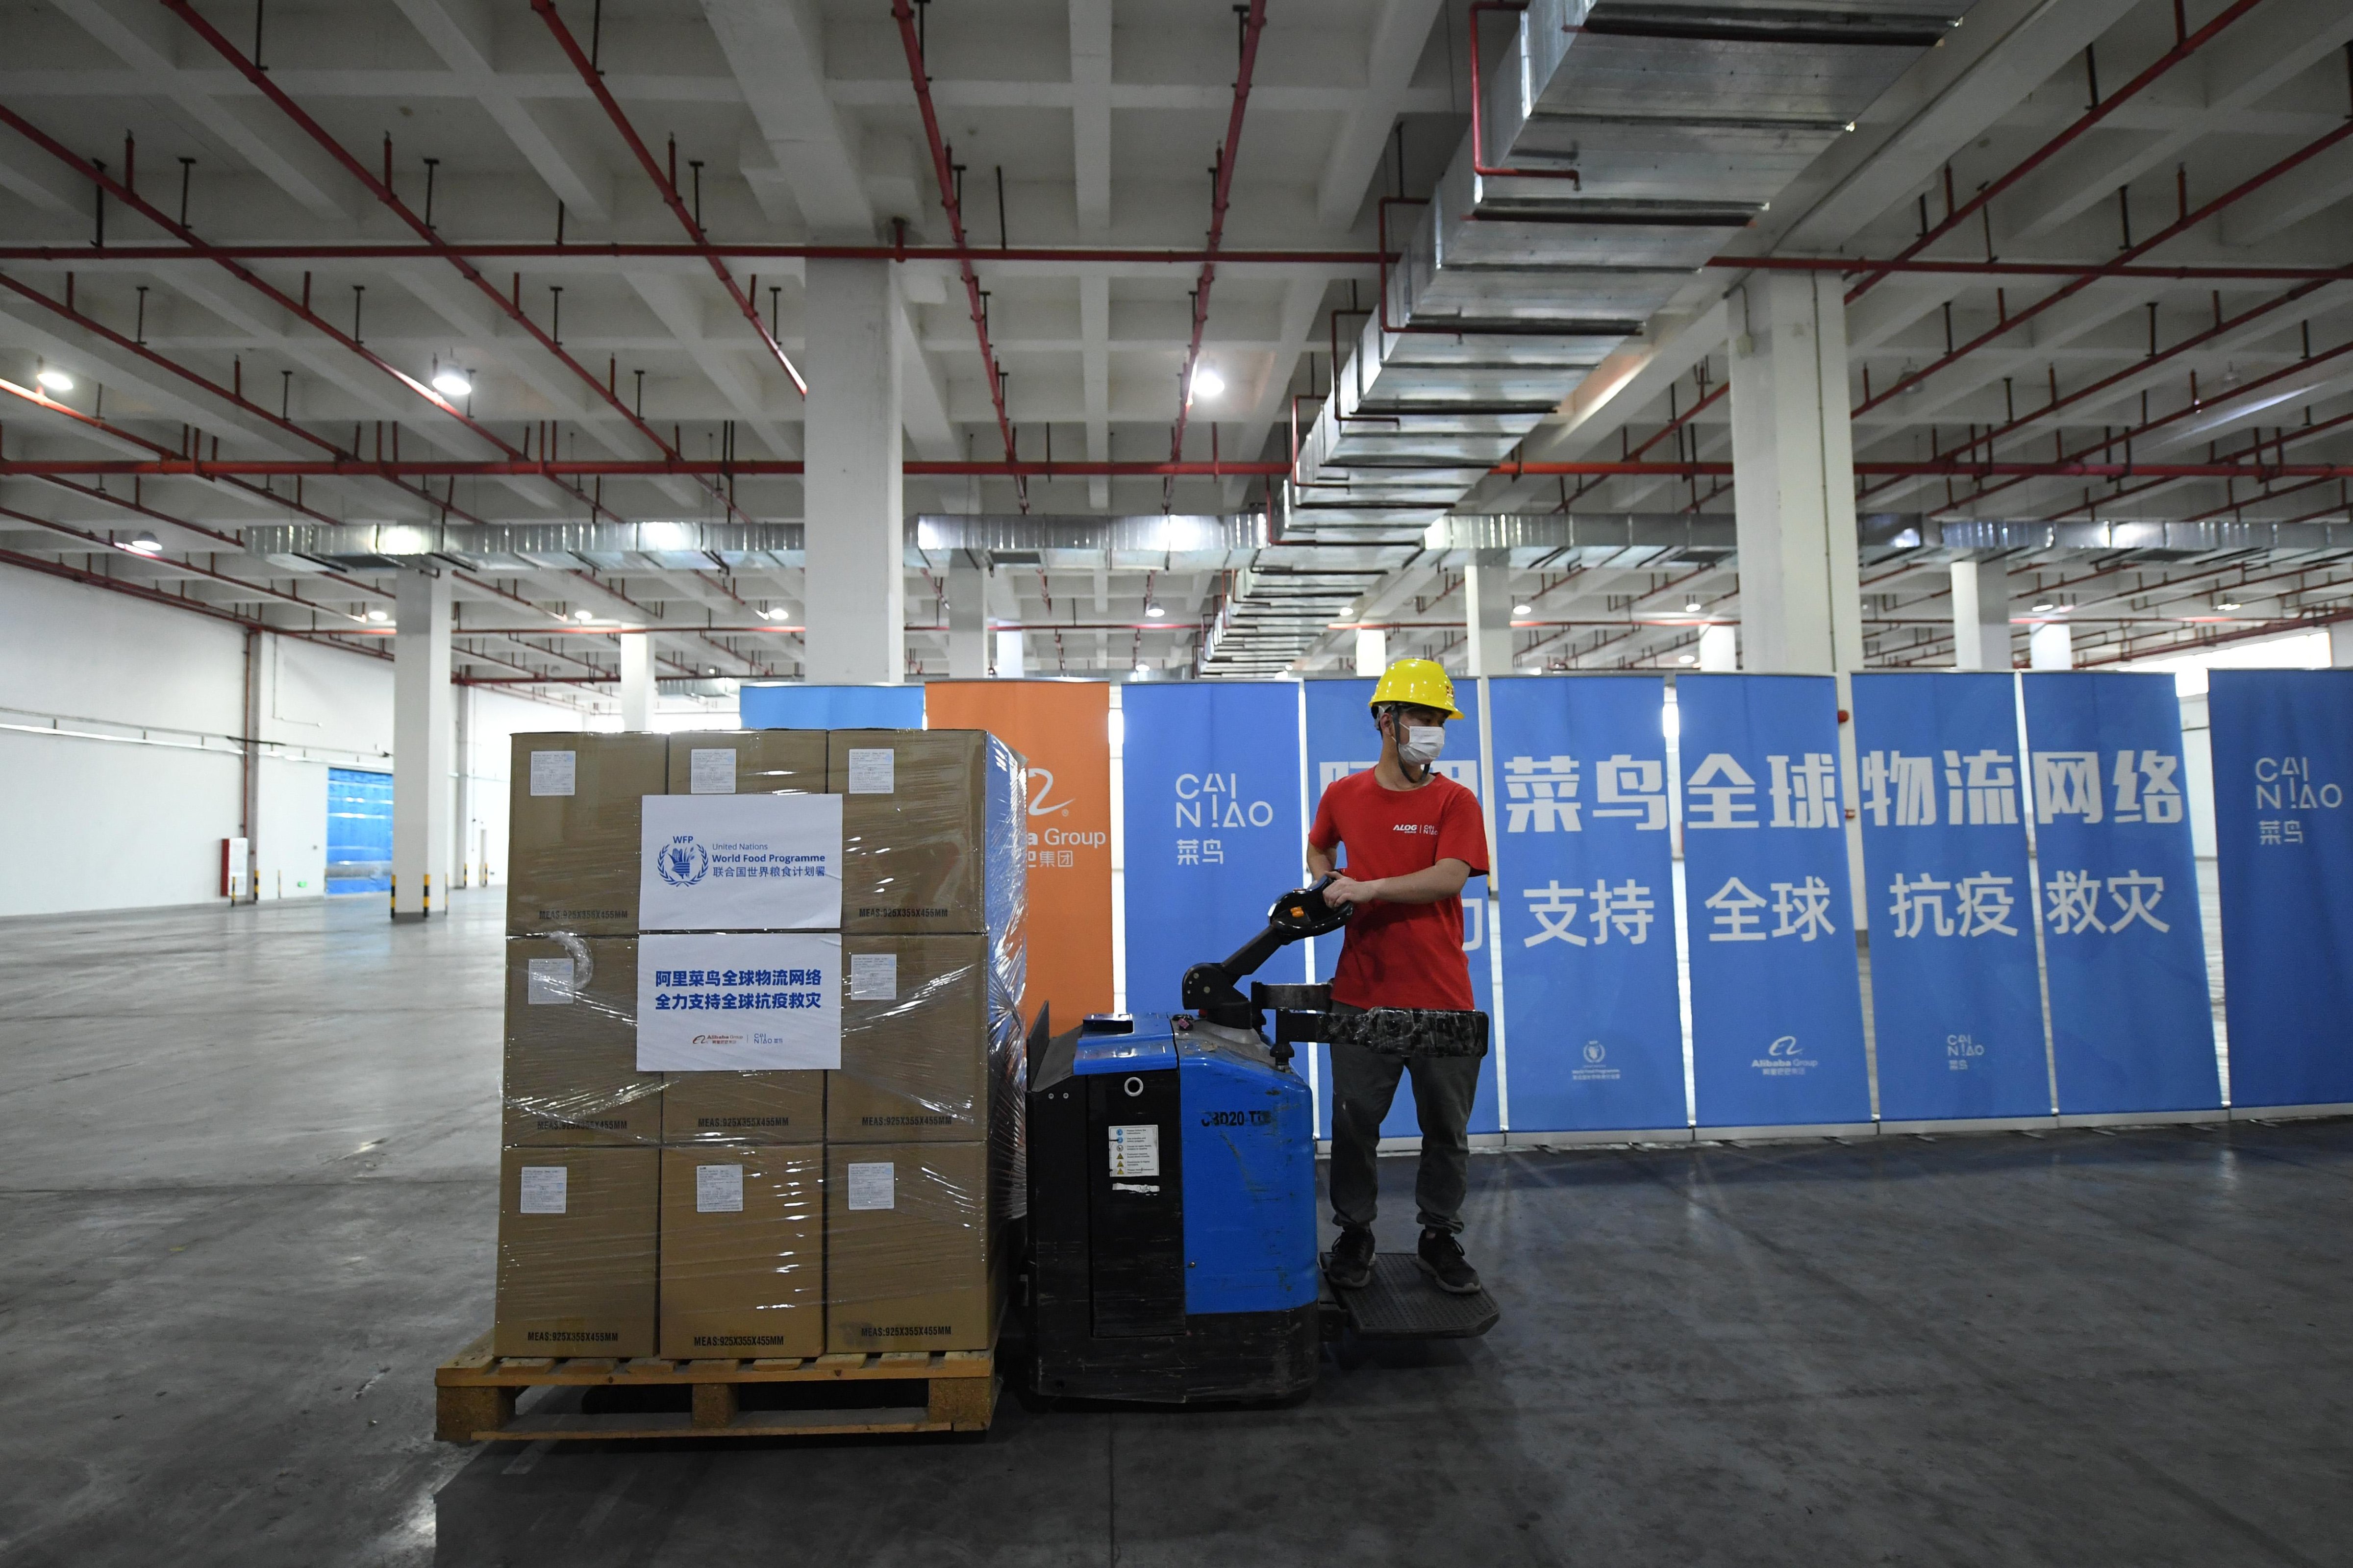 A staff member arranges boxes of anti-epidemic supplies of the United Nations World Food Programme (WFP) at Cainiao's Nansha warehouse on in Guangzhou, China on April 29, 2020. (Ji Dong—China News Service/Getty Images)